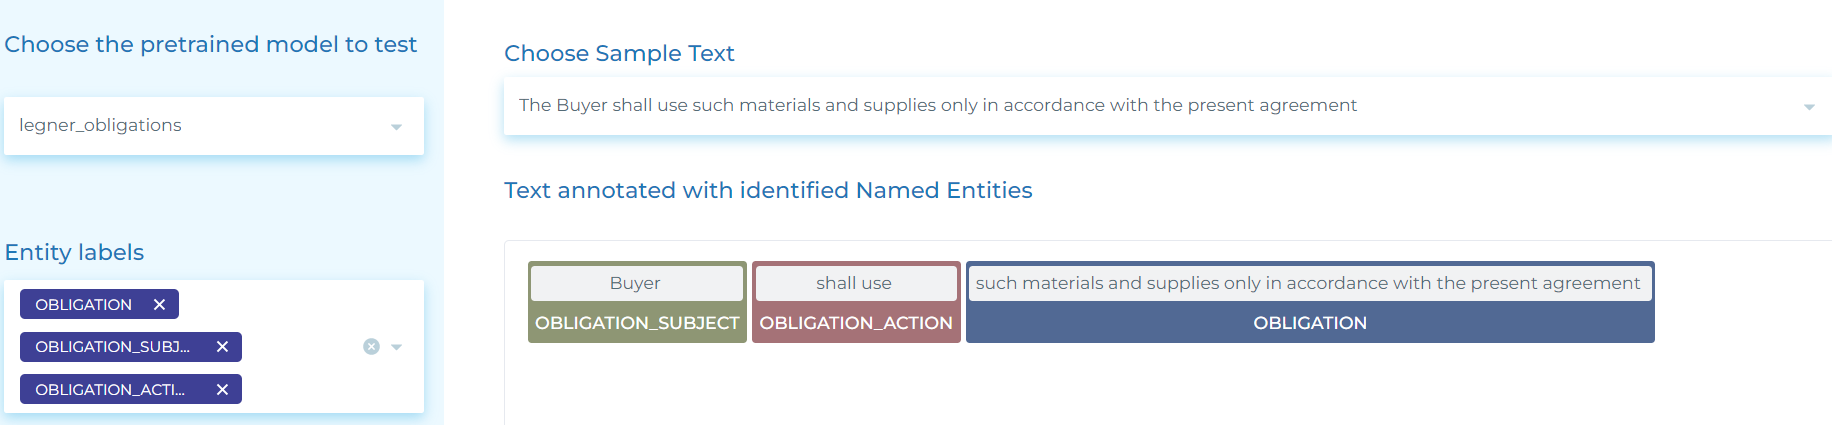 Automatic identification of entities